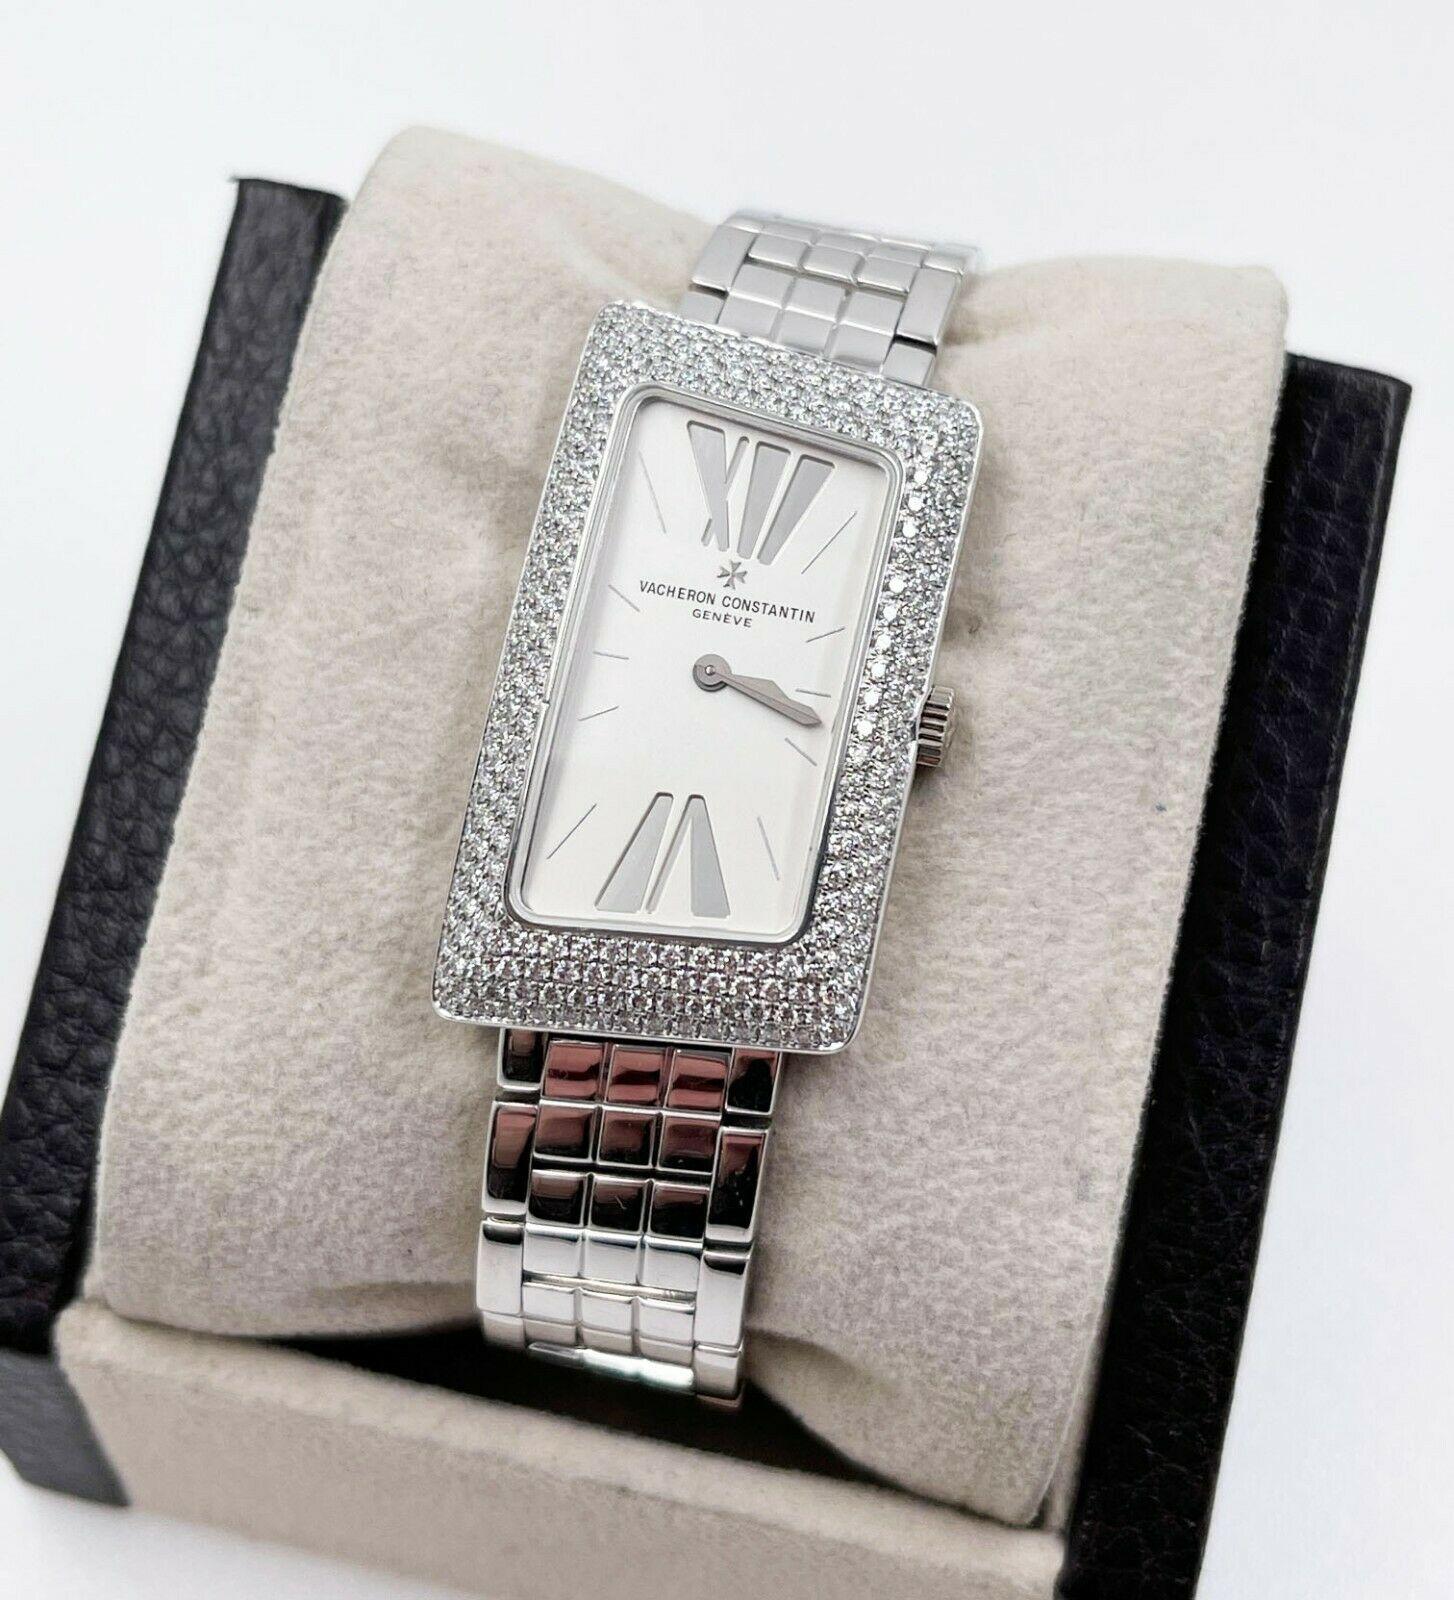 Style Number: 25515/u01g-9233

 

Model: Cambree

 

Case Material: 18K White Gold

 

Band: 18K White Gold

 

Bezel:  Original Diamond Bezel

 

Dial: Silver

 

Face: Sapphire Crystal 

 

Case Size: 37mm x 21mm 

 

Includes: 

-Elegant Watch